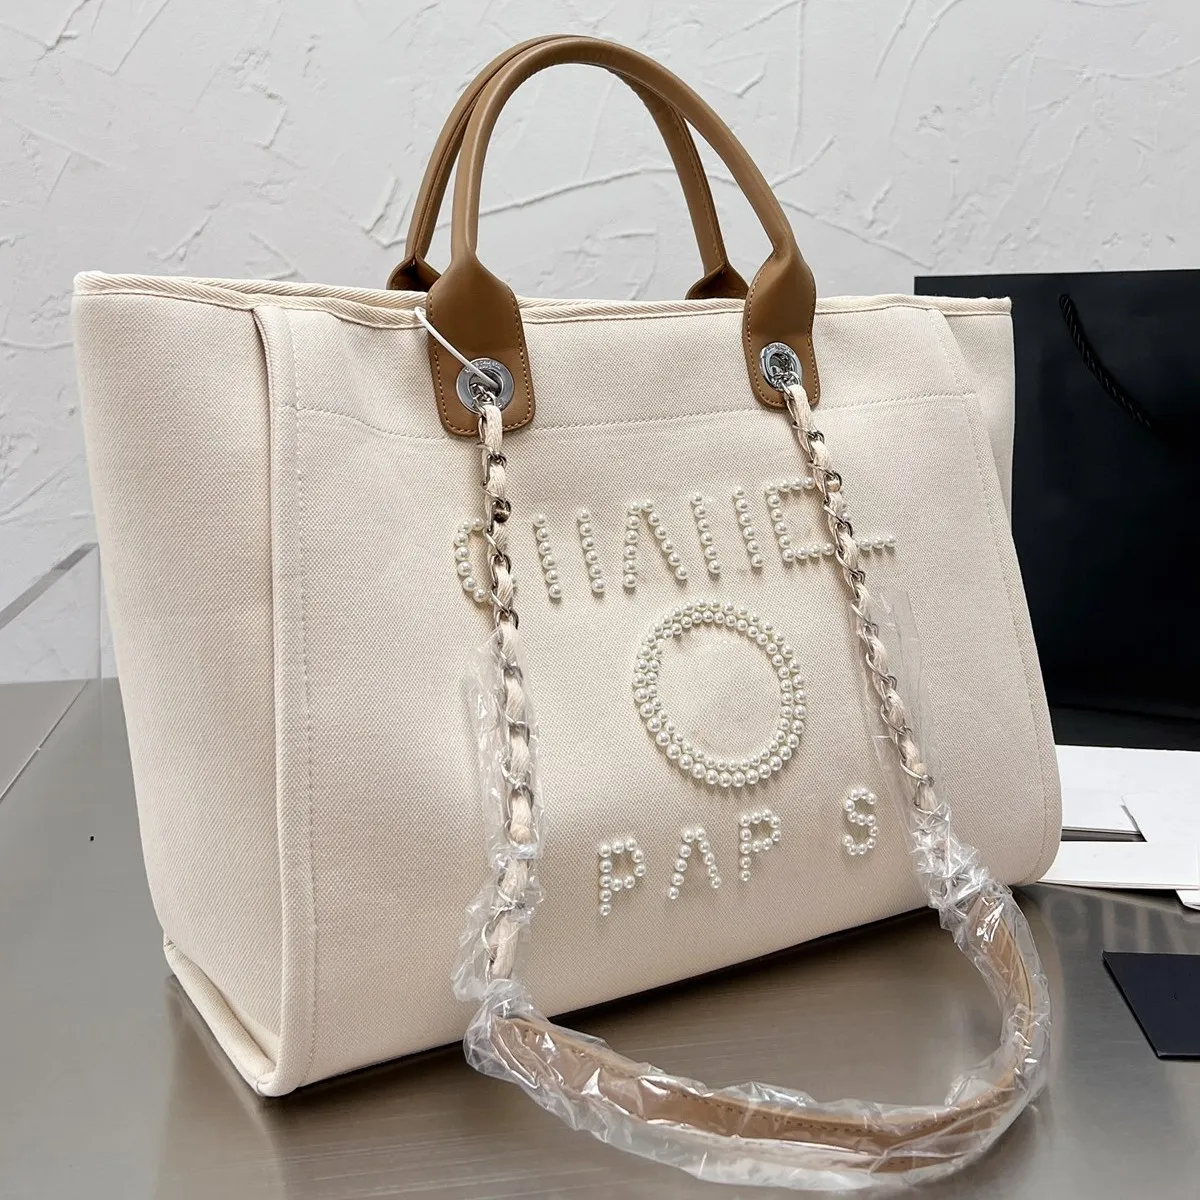 Chanel Deauville Real VS Fake ✓